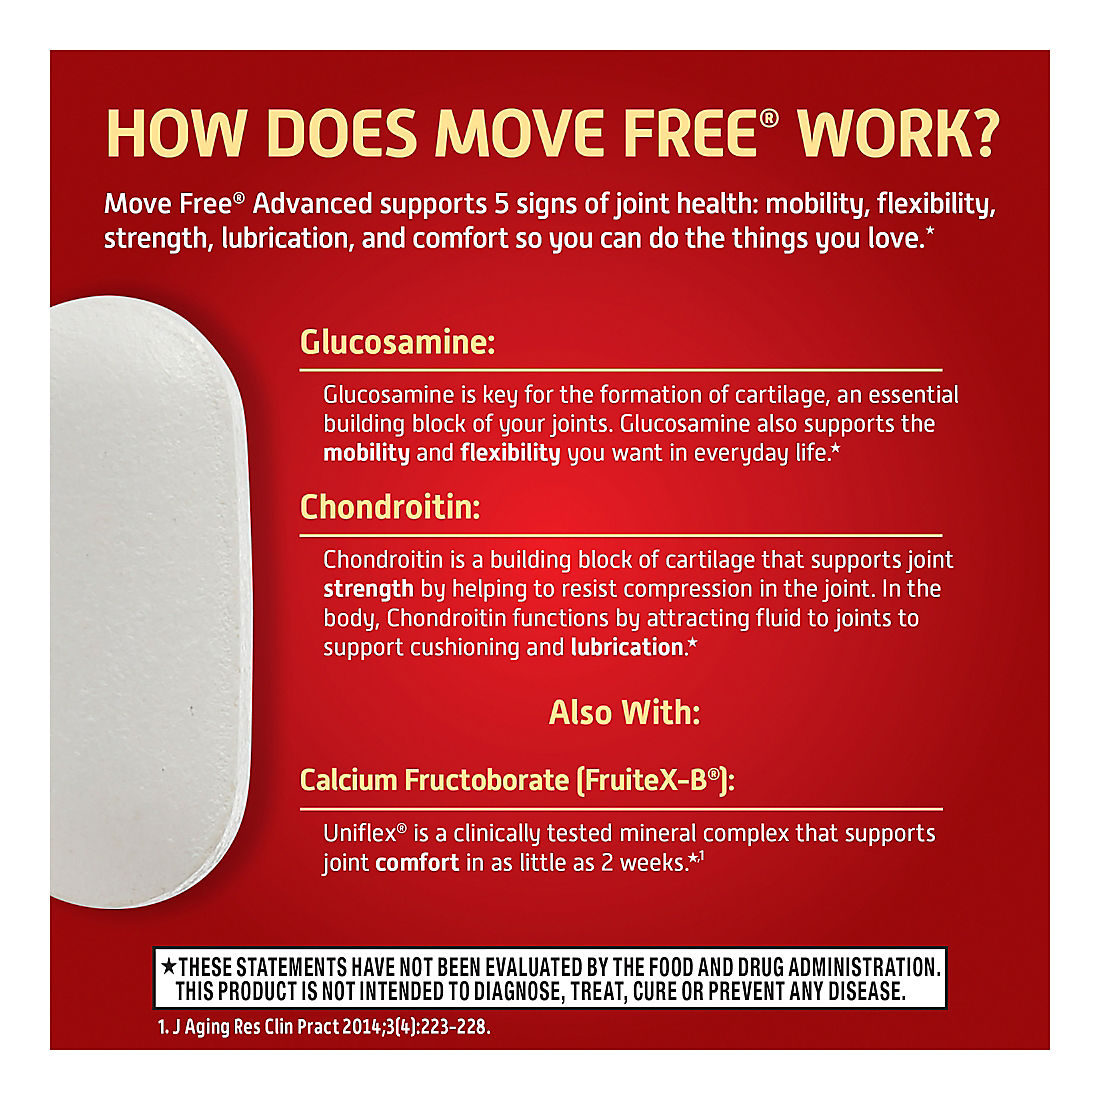 Move Free Advanced Tablets, 200 ct.